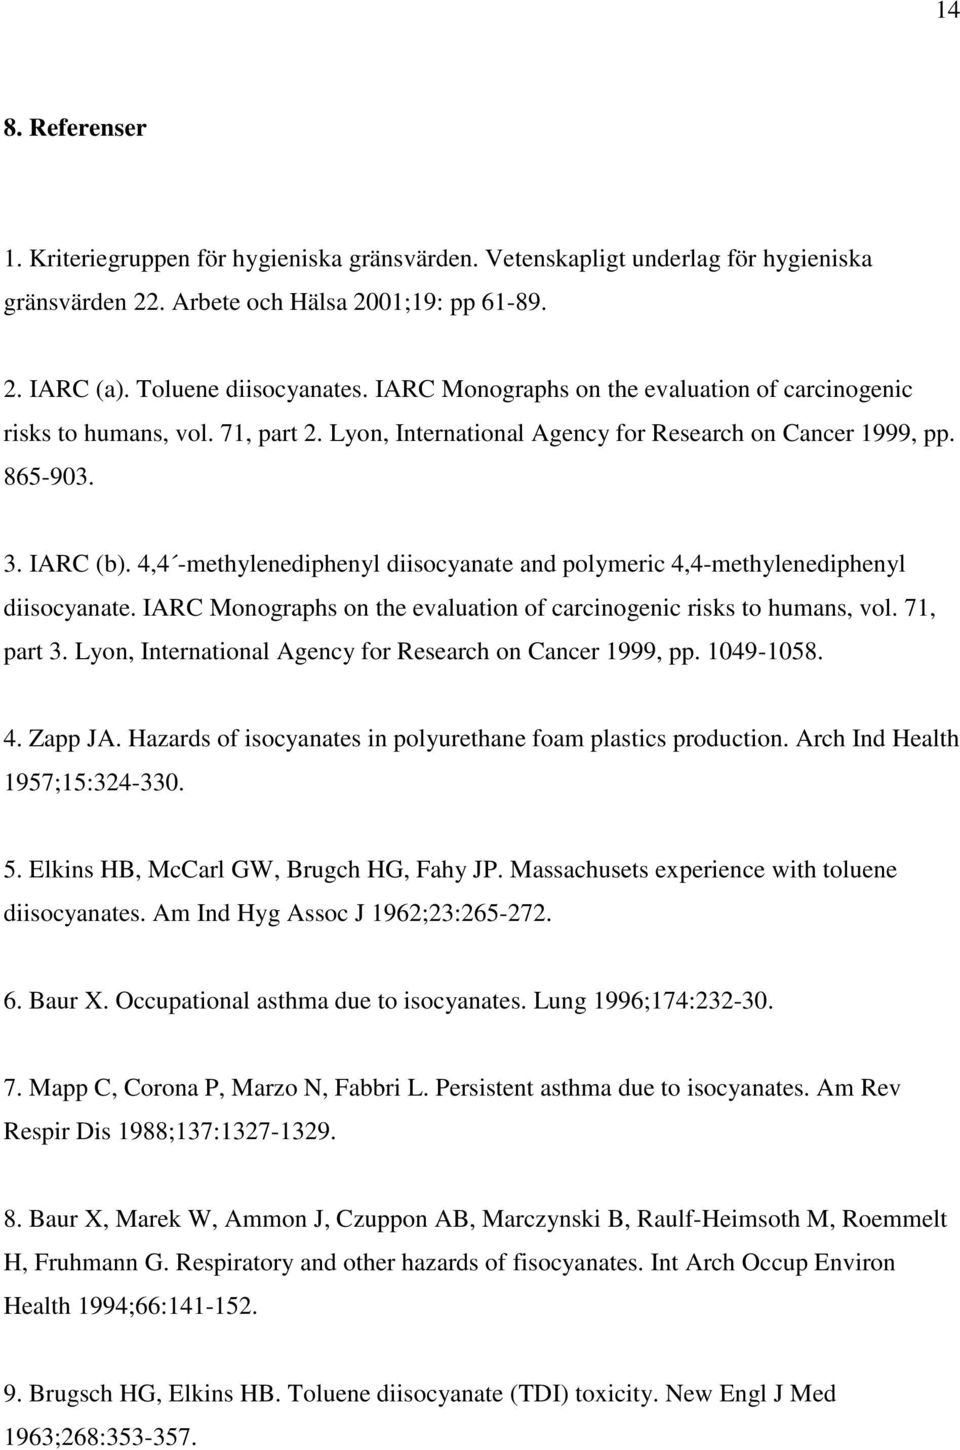 4,4 -methylenediphenyl diisocyanate and polymeric 4,4-methylenediphenyl diisocyanate. IARC Monographs on the evaluation of carcinogenic risks to humans, vol. 71, part 3.